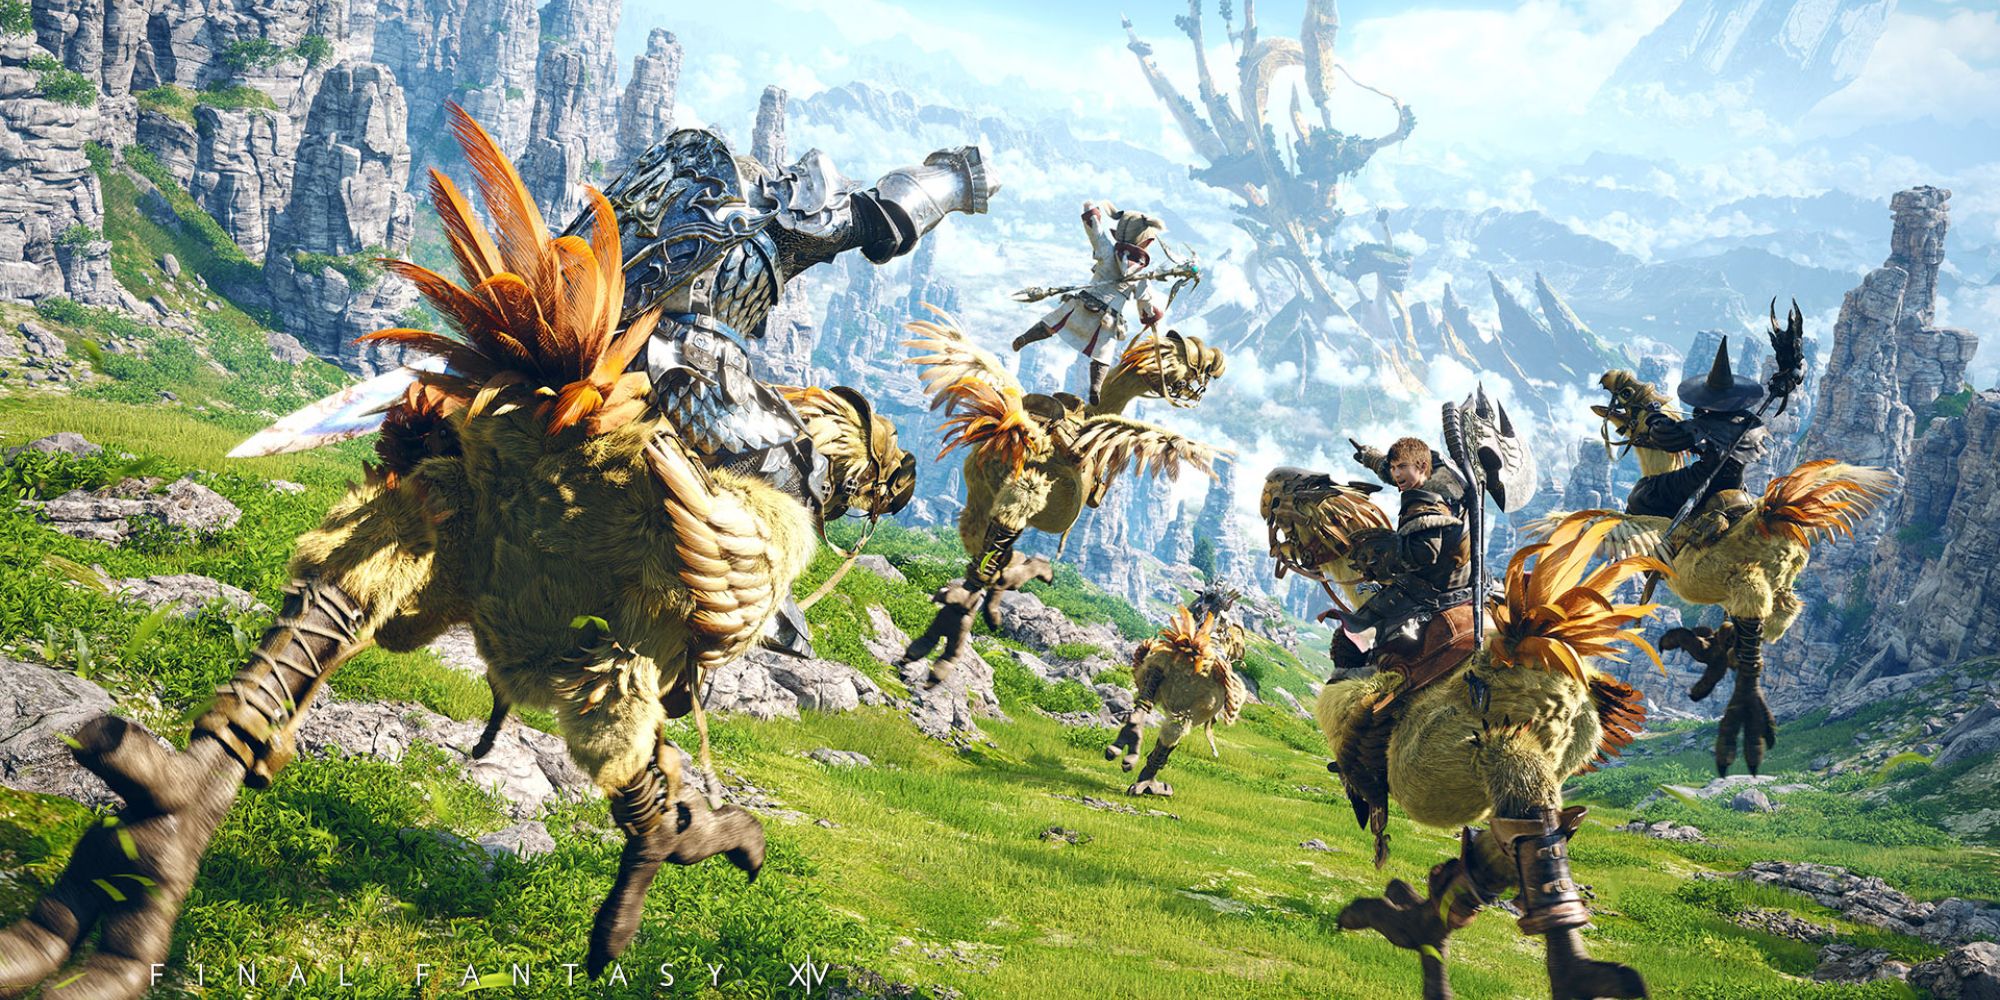 Final Fantasy 14 Is Experiencing Technical Difficulties Due To DDoS Attack